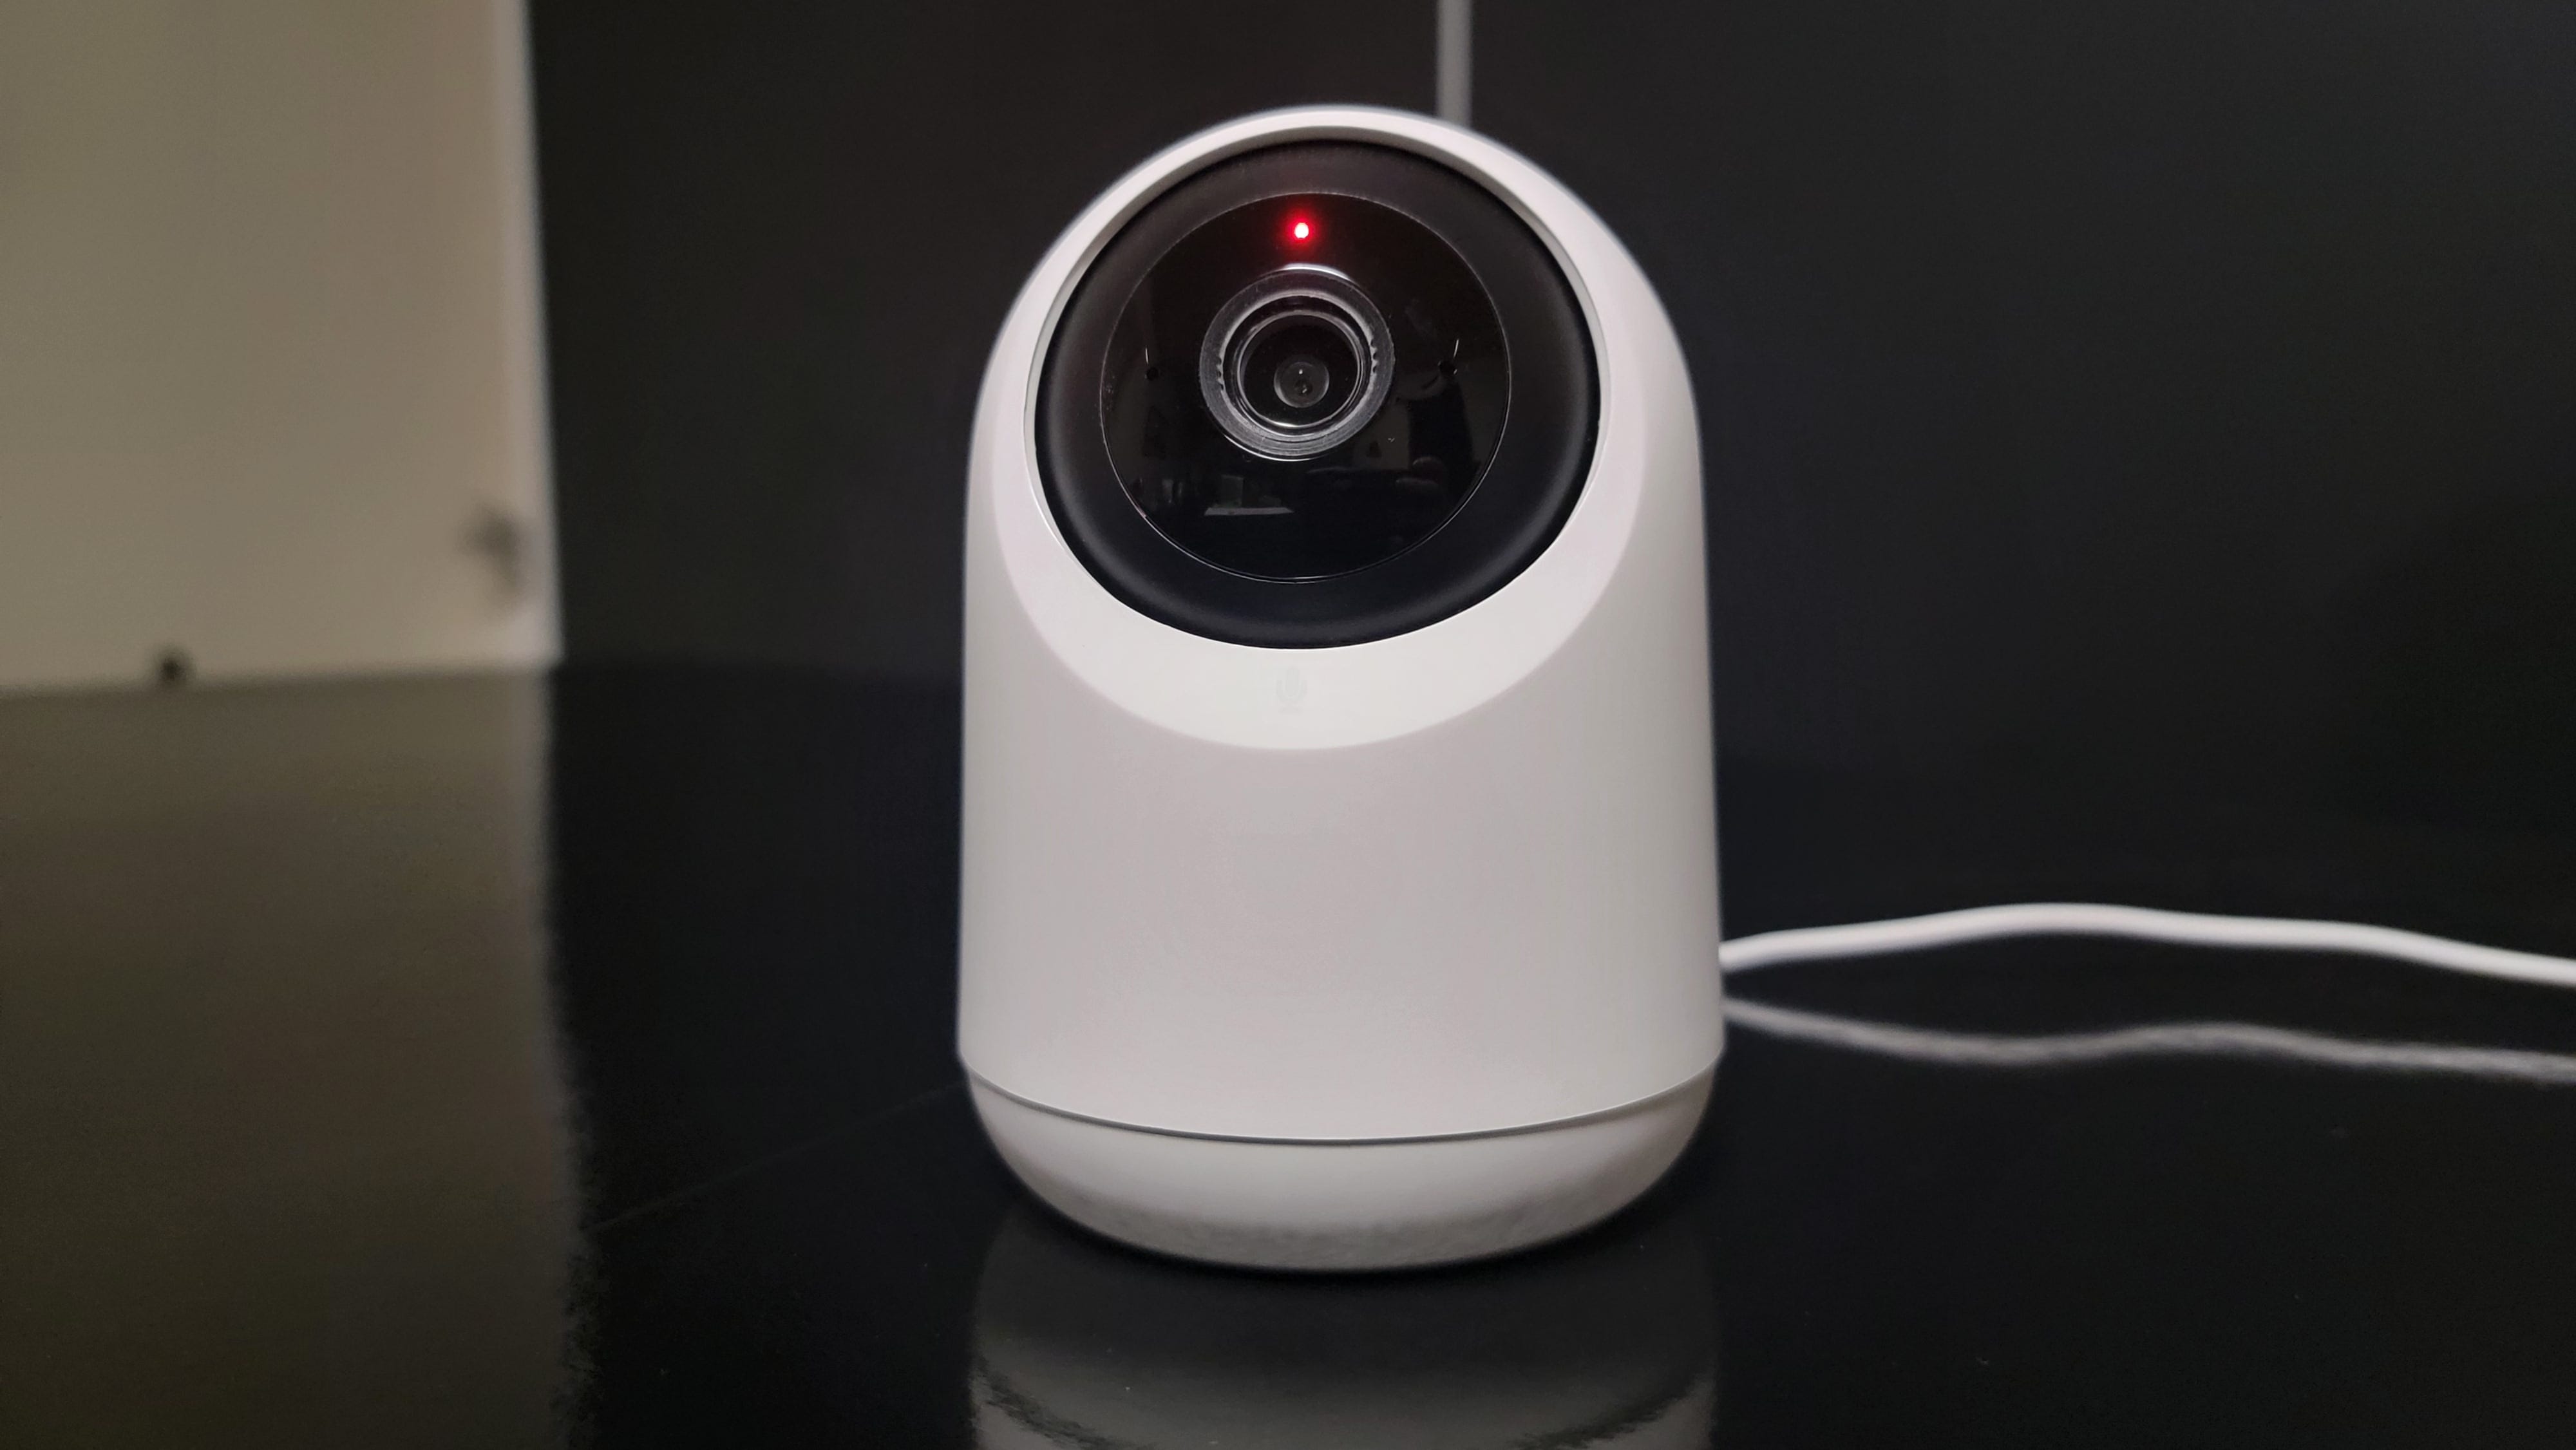 SwitchBot Pan Tilt camera with red light indicating Privacy Mode